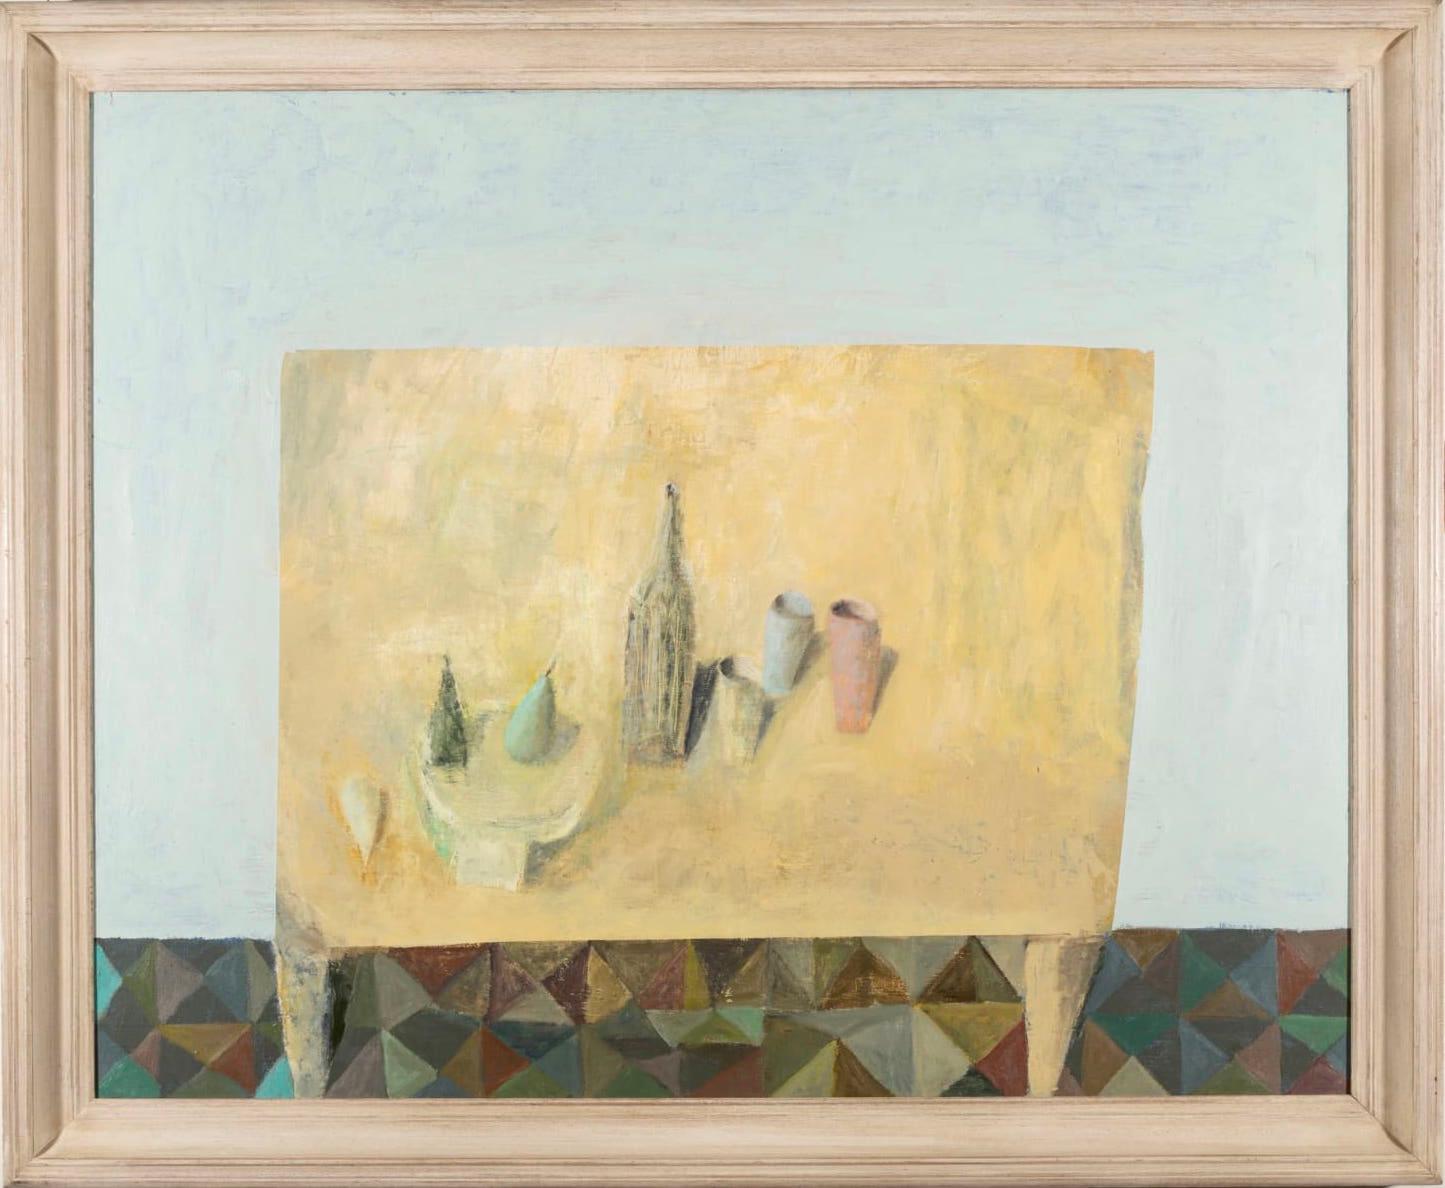 Nicholas Turner Abstract Painting - The Yellow Table, Oil on Canvas, 2016-2020